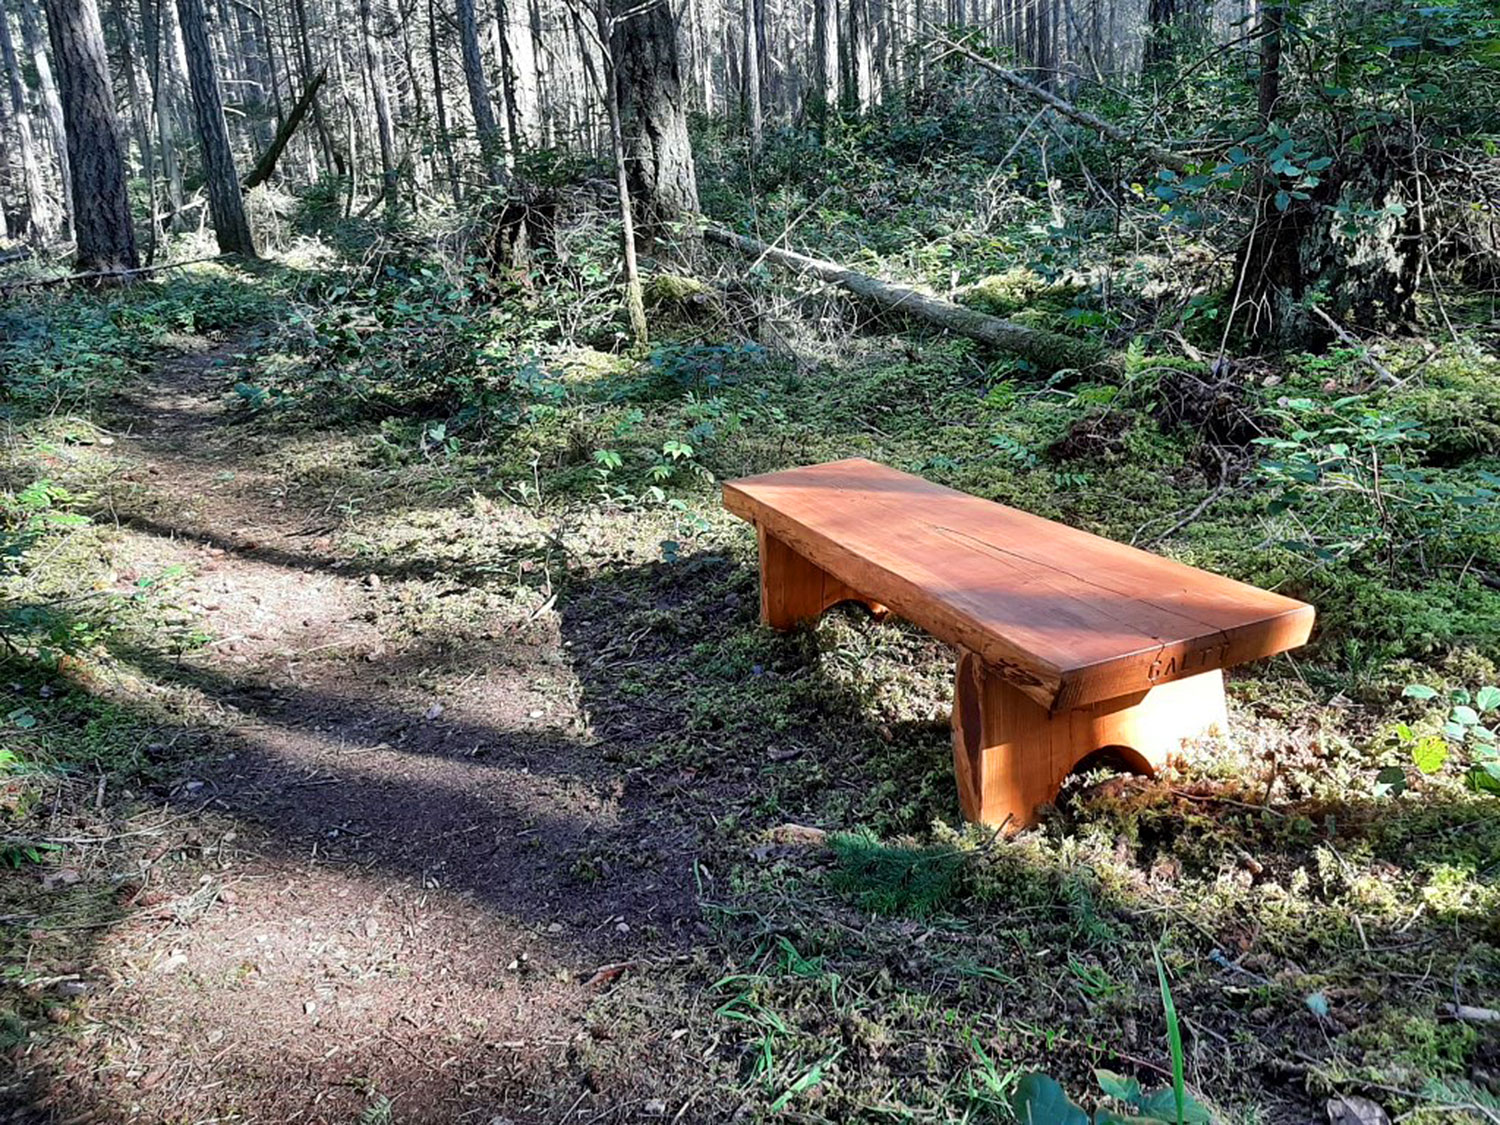 Beautifully crafted wooden bench beside a trail